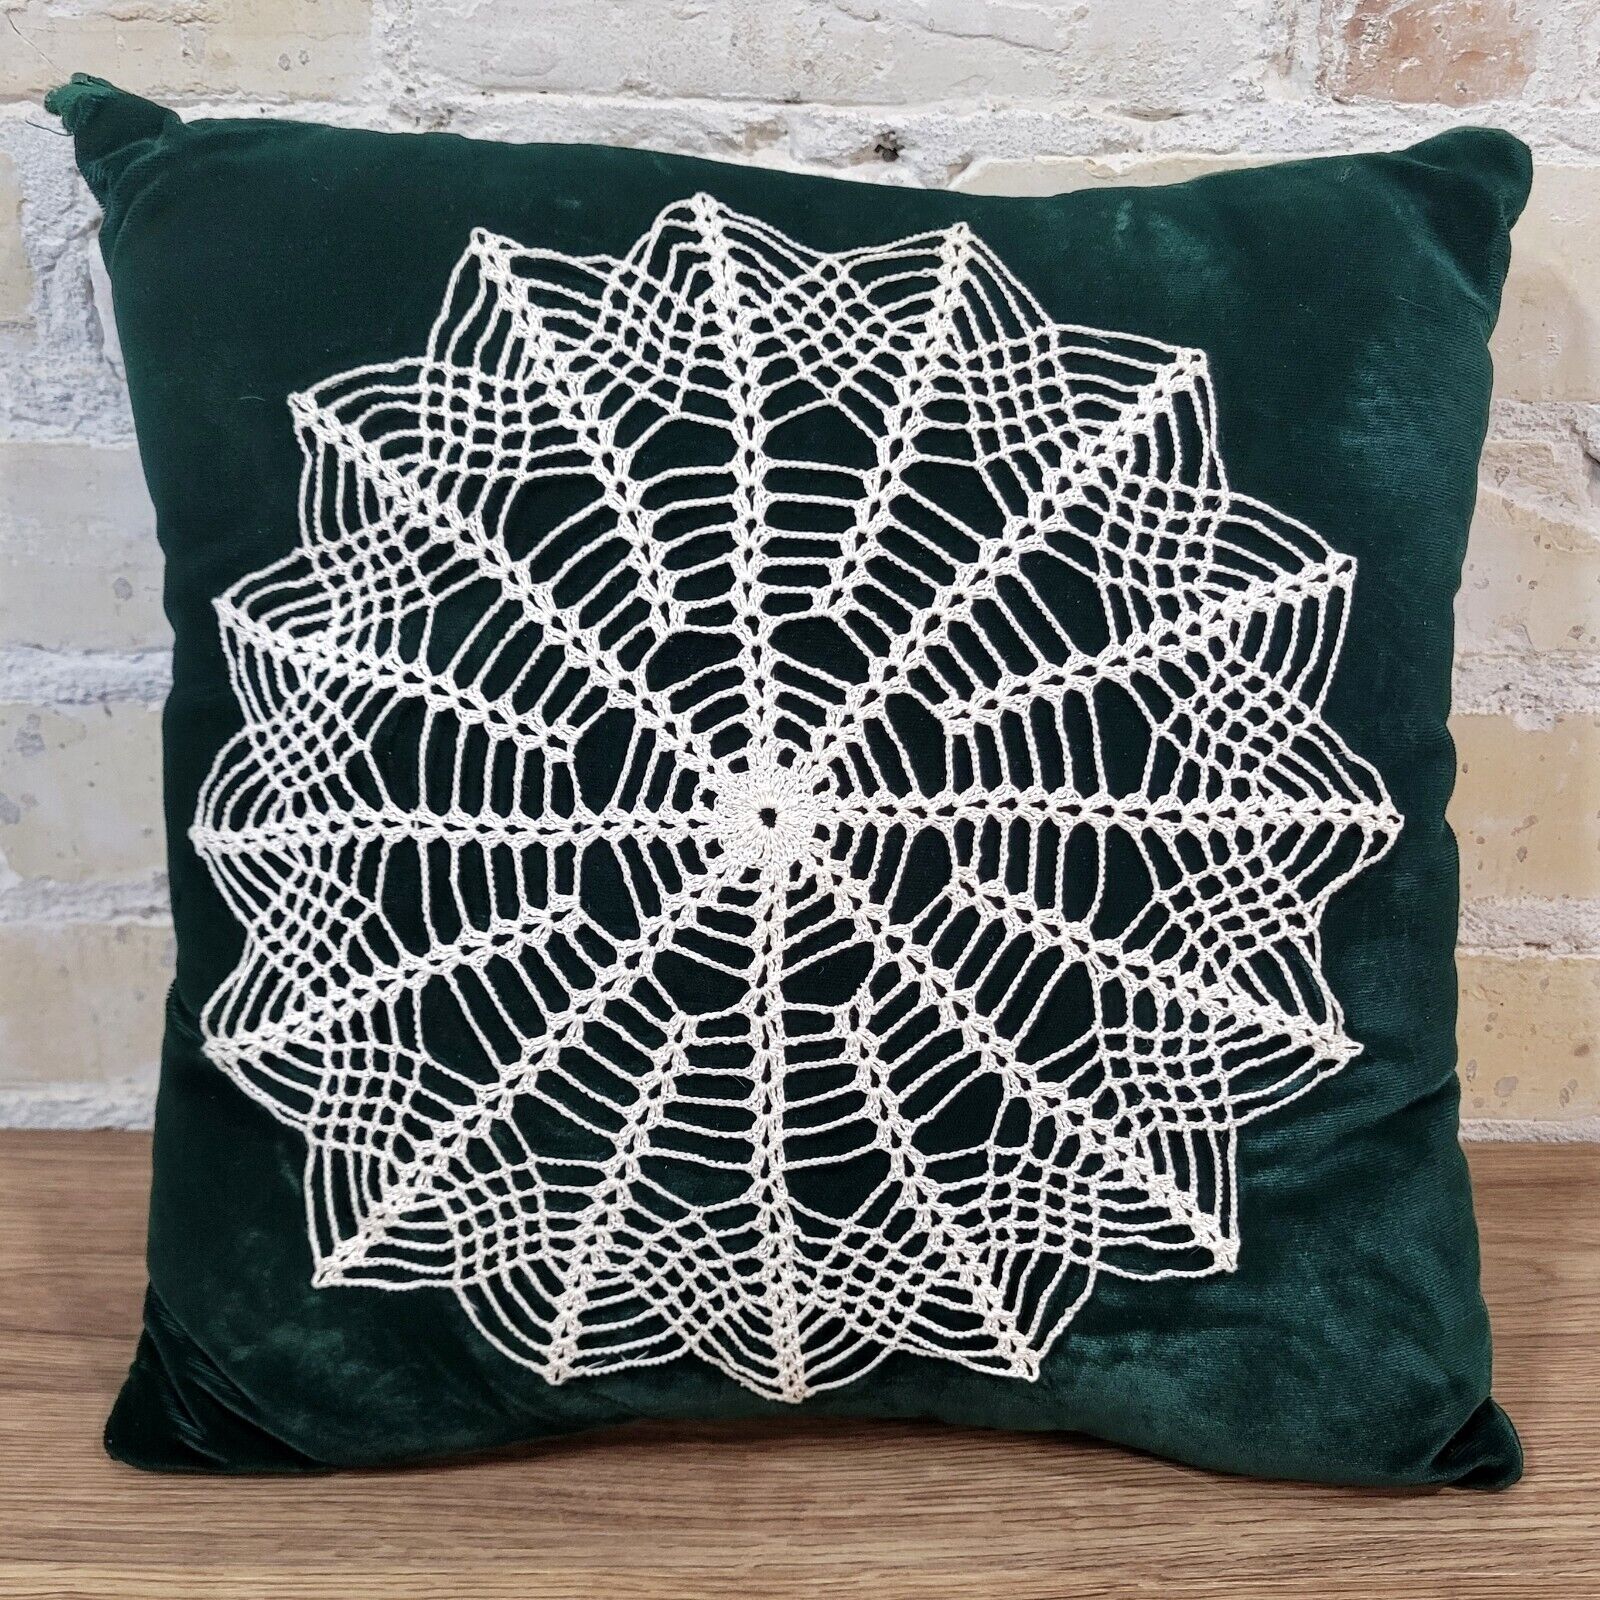 Vintage Green Velvet Hand Tatted Lace Doily Pillow Accent Cottage Dark Boho 13